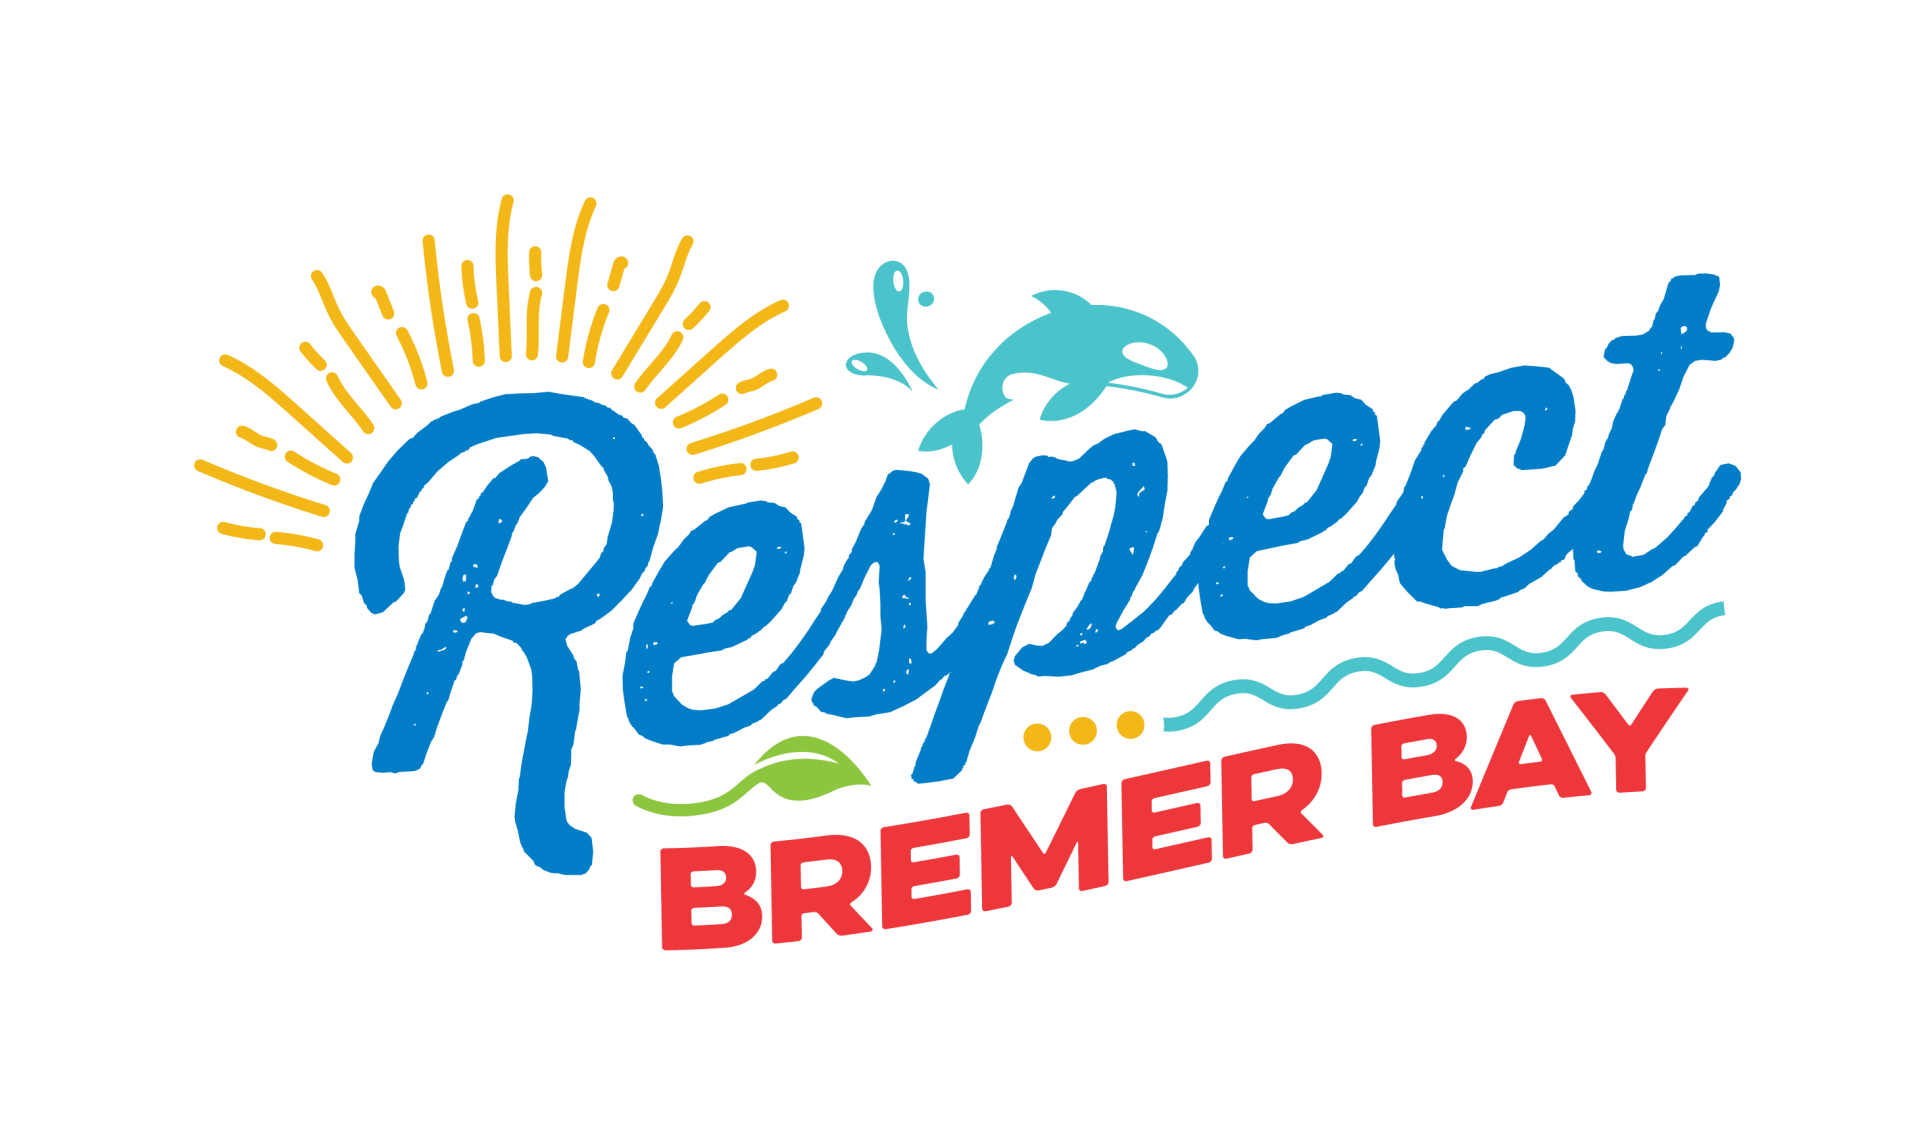 Respect Bremer Bay campaign encourages visitors to be aware of their impact